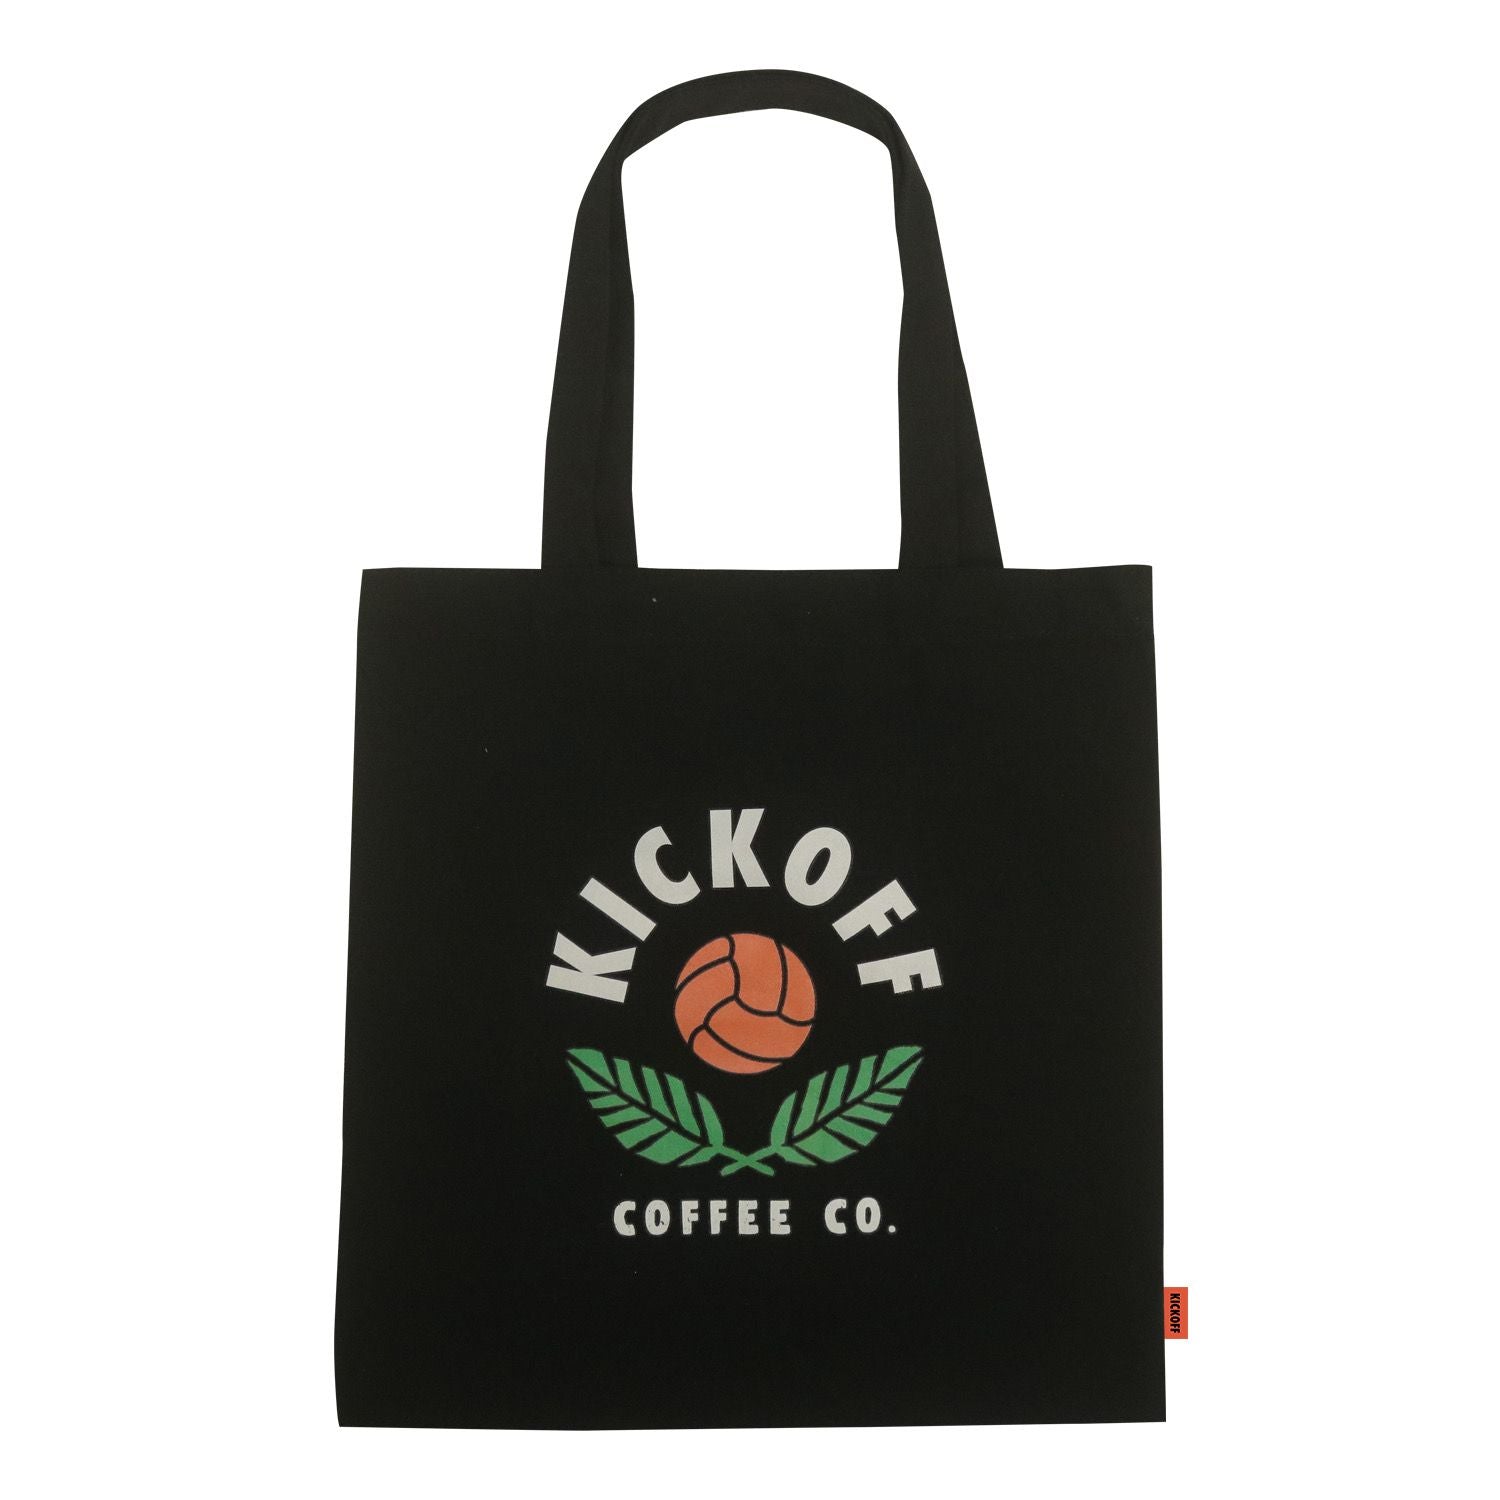 Black medium-size tote bag with kickoff coffee circle logo on the front